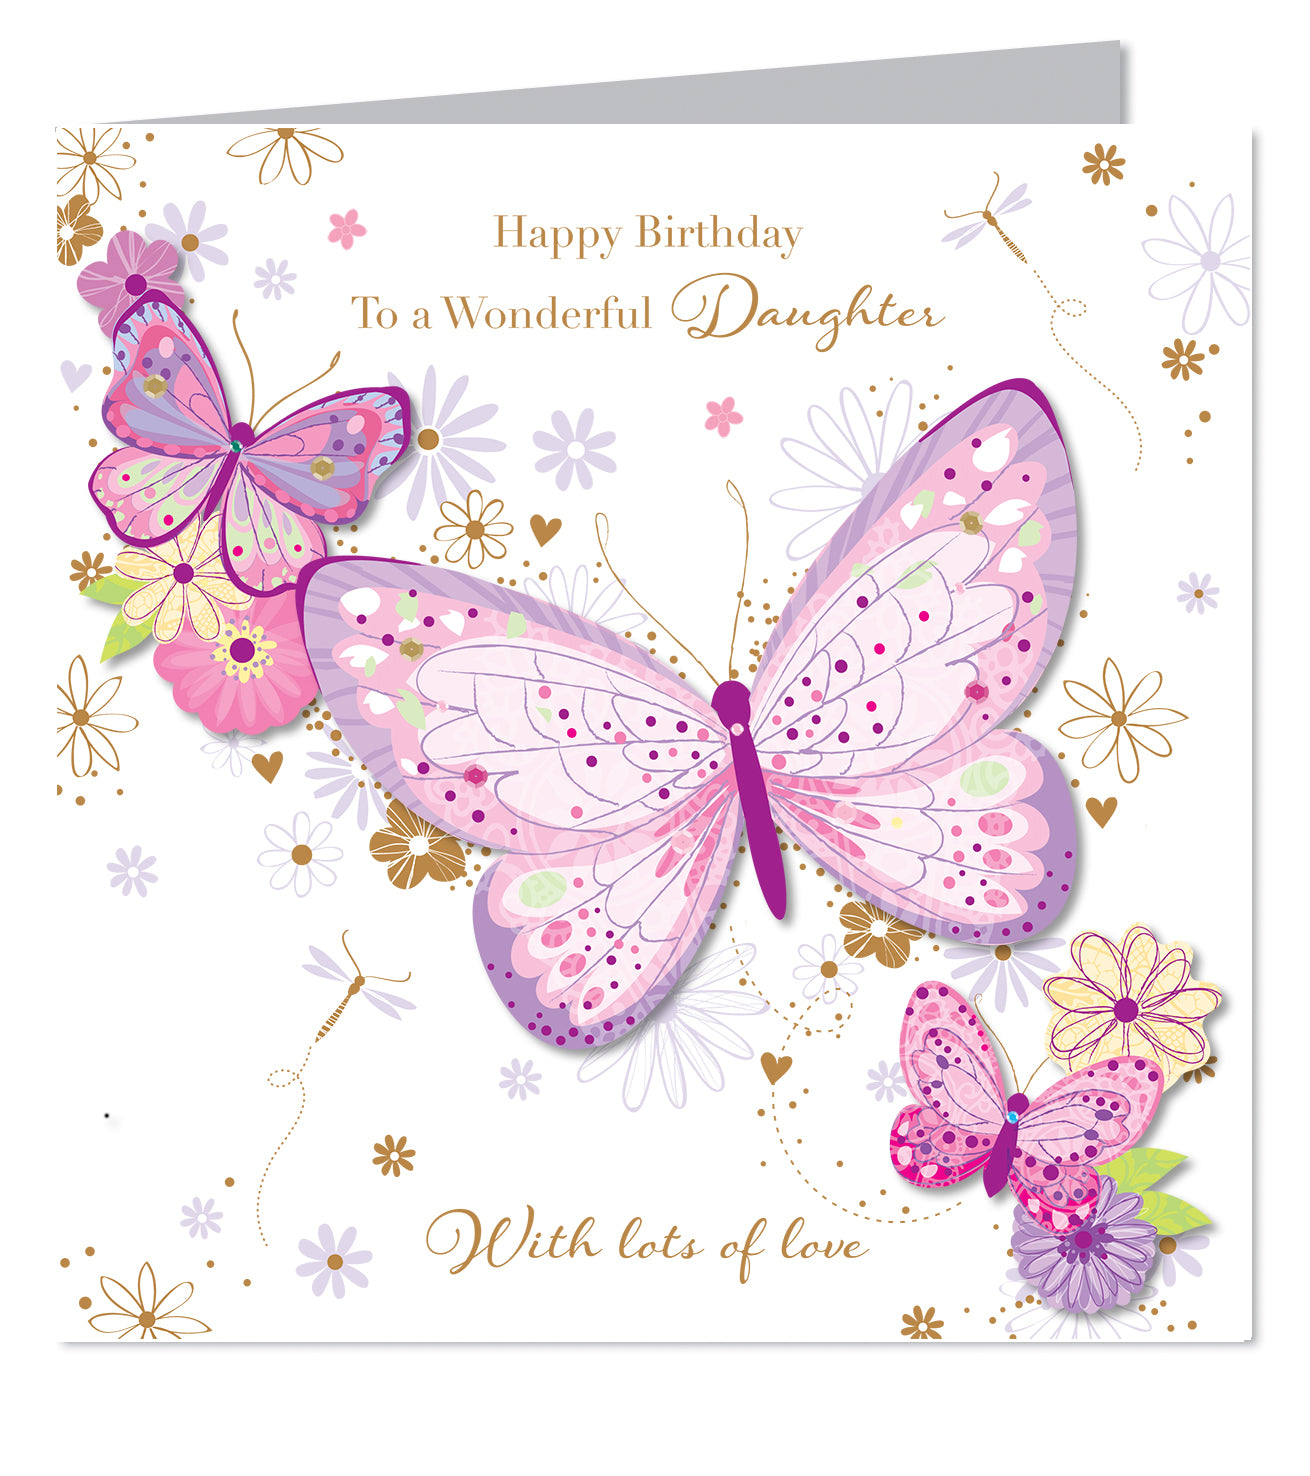 To a Wonderful Daughter Birthday Card - Butterfly and Flower